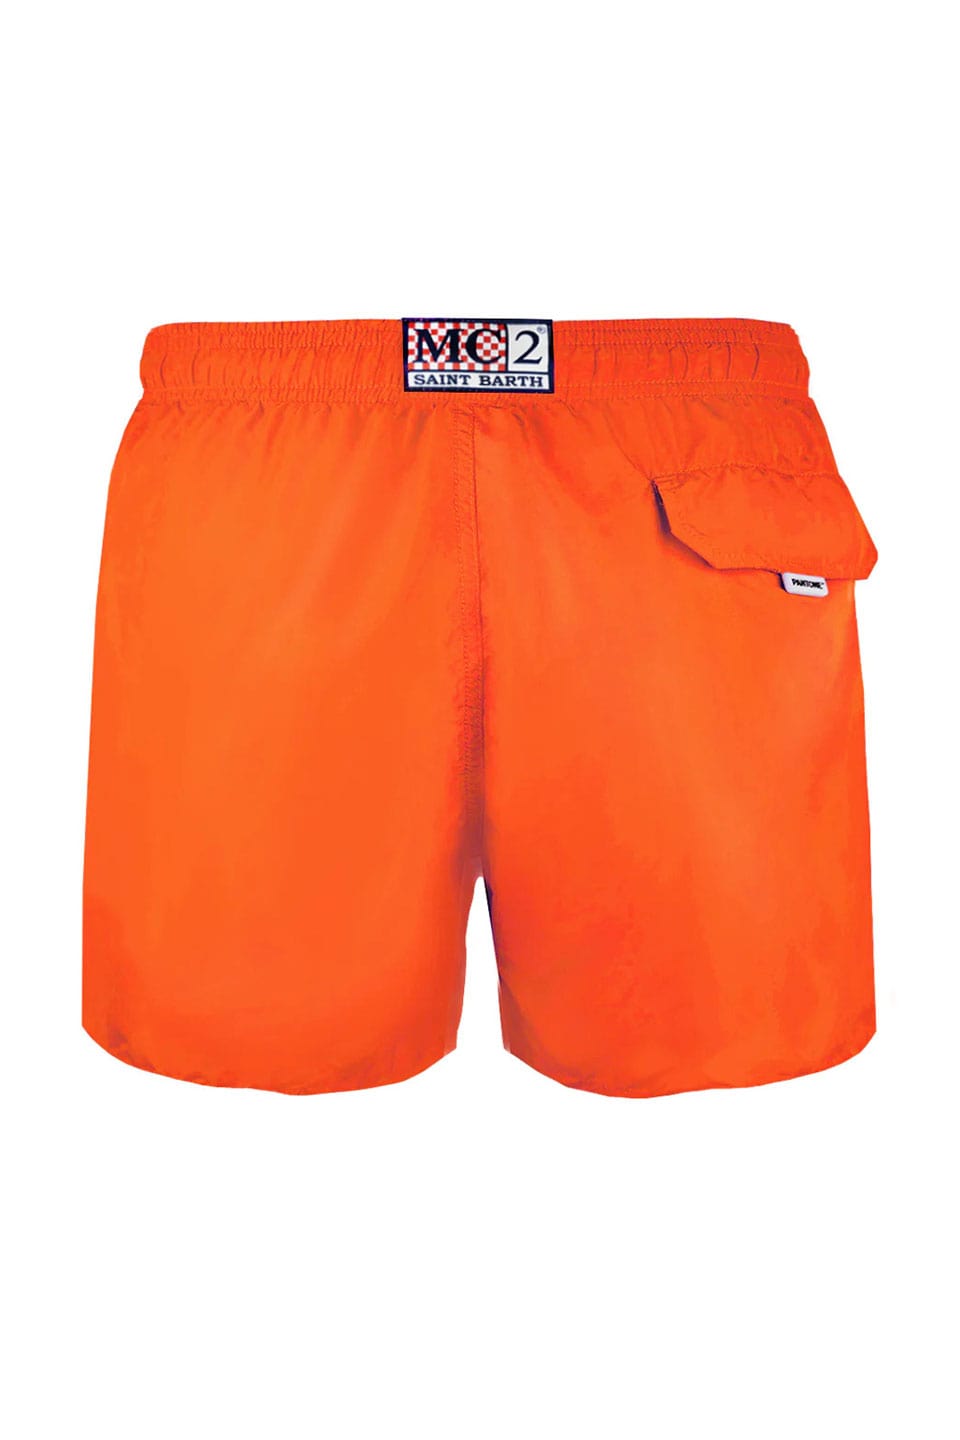 Thumbnail for Product gallery 6, swim shorts for men in orange color product back view